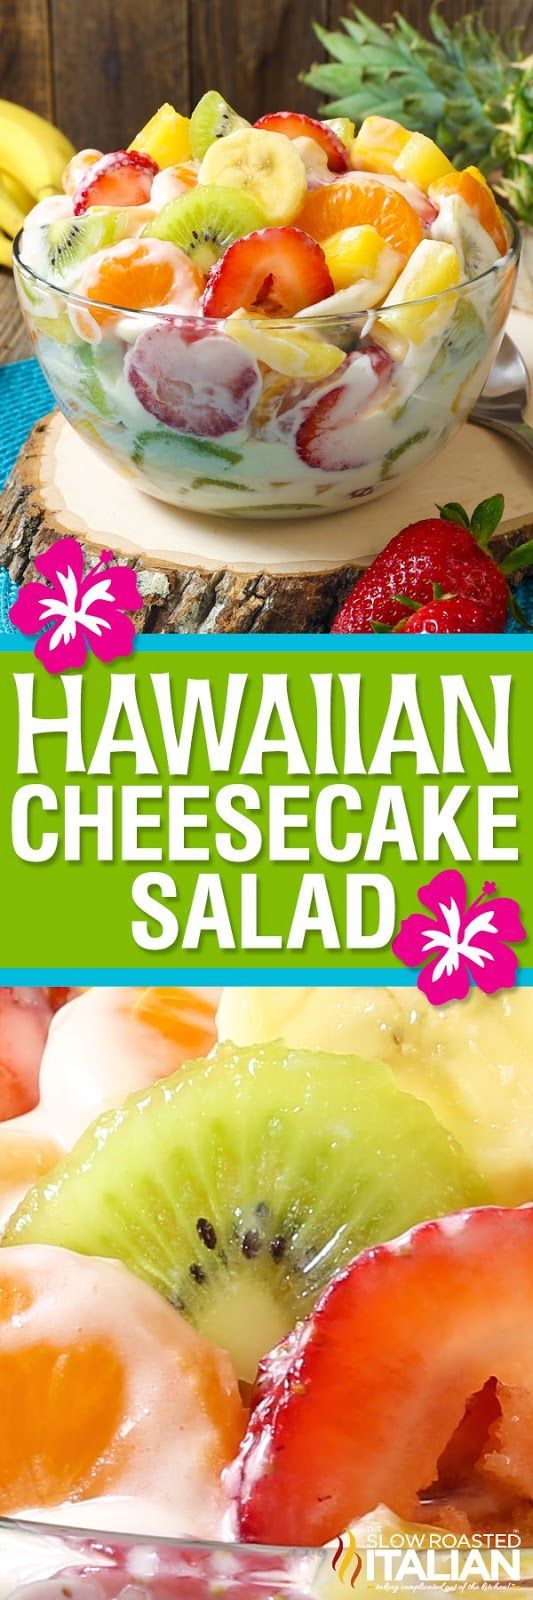 Hawaiian Cheesecake Salad comes together so simply with fresh tropical fruit and a rich and creamy cheesecake filling to create